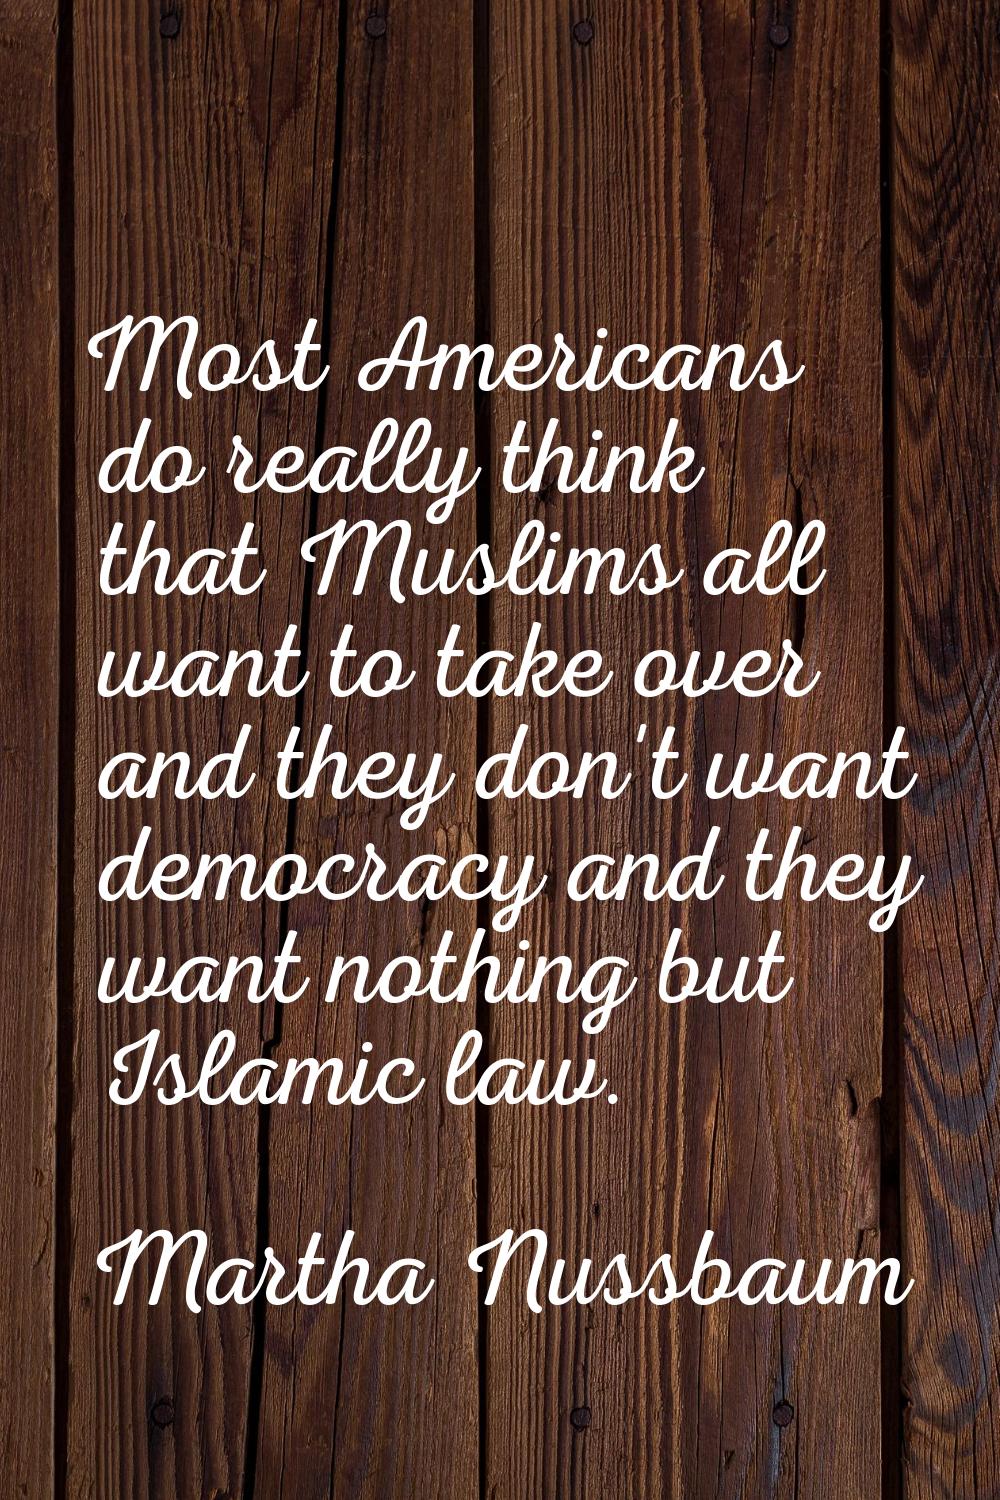 Most Americans do really think that Muslims all want to take over and they don't want democracy and